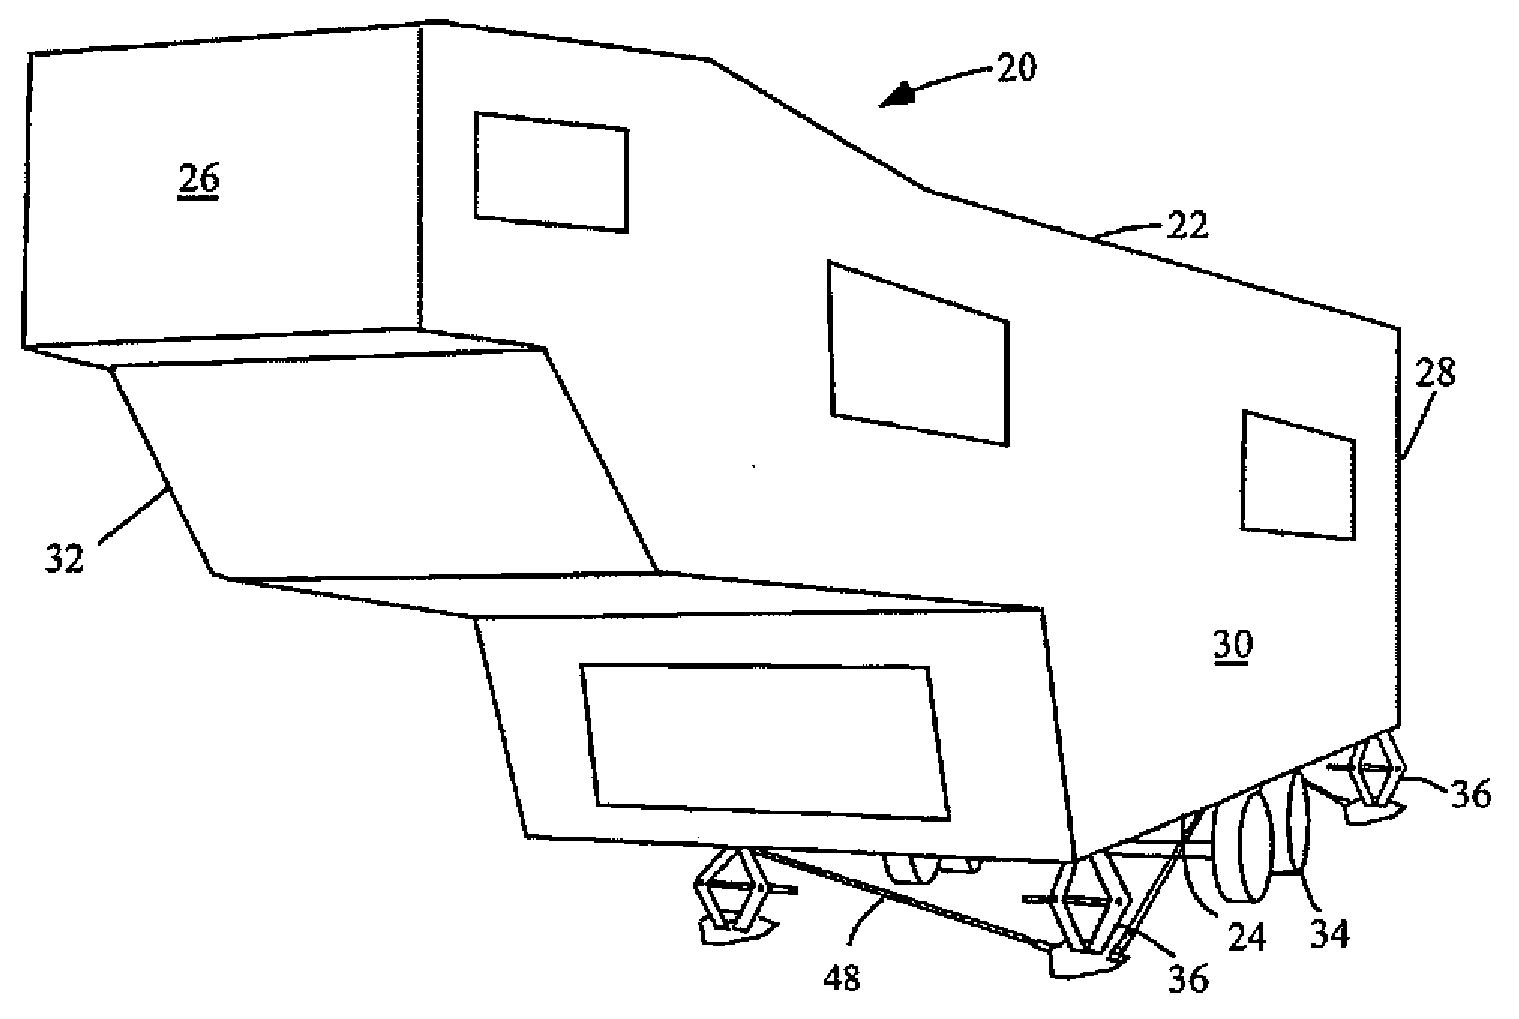 Trailer stabilizing device and method of using same